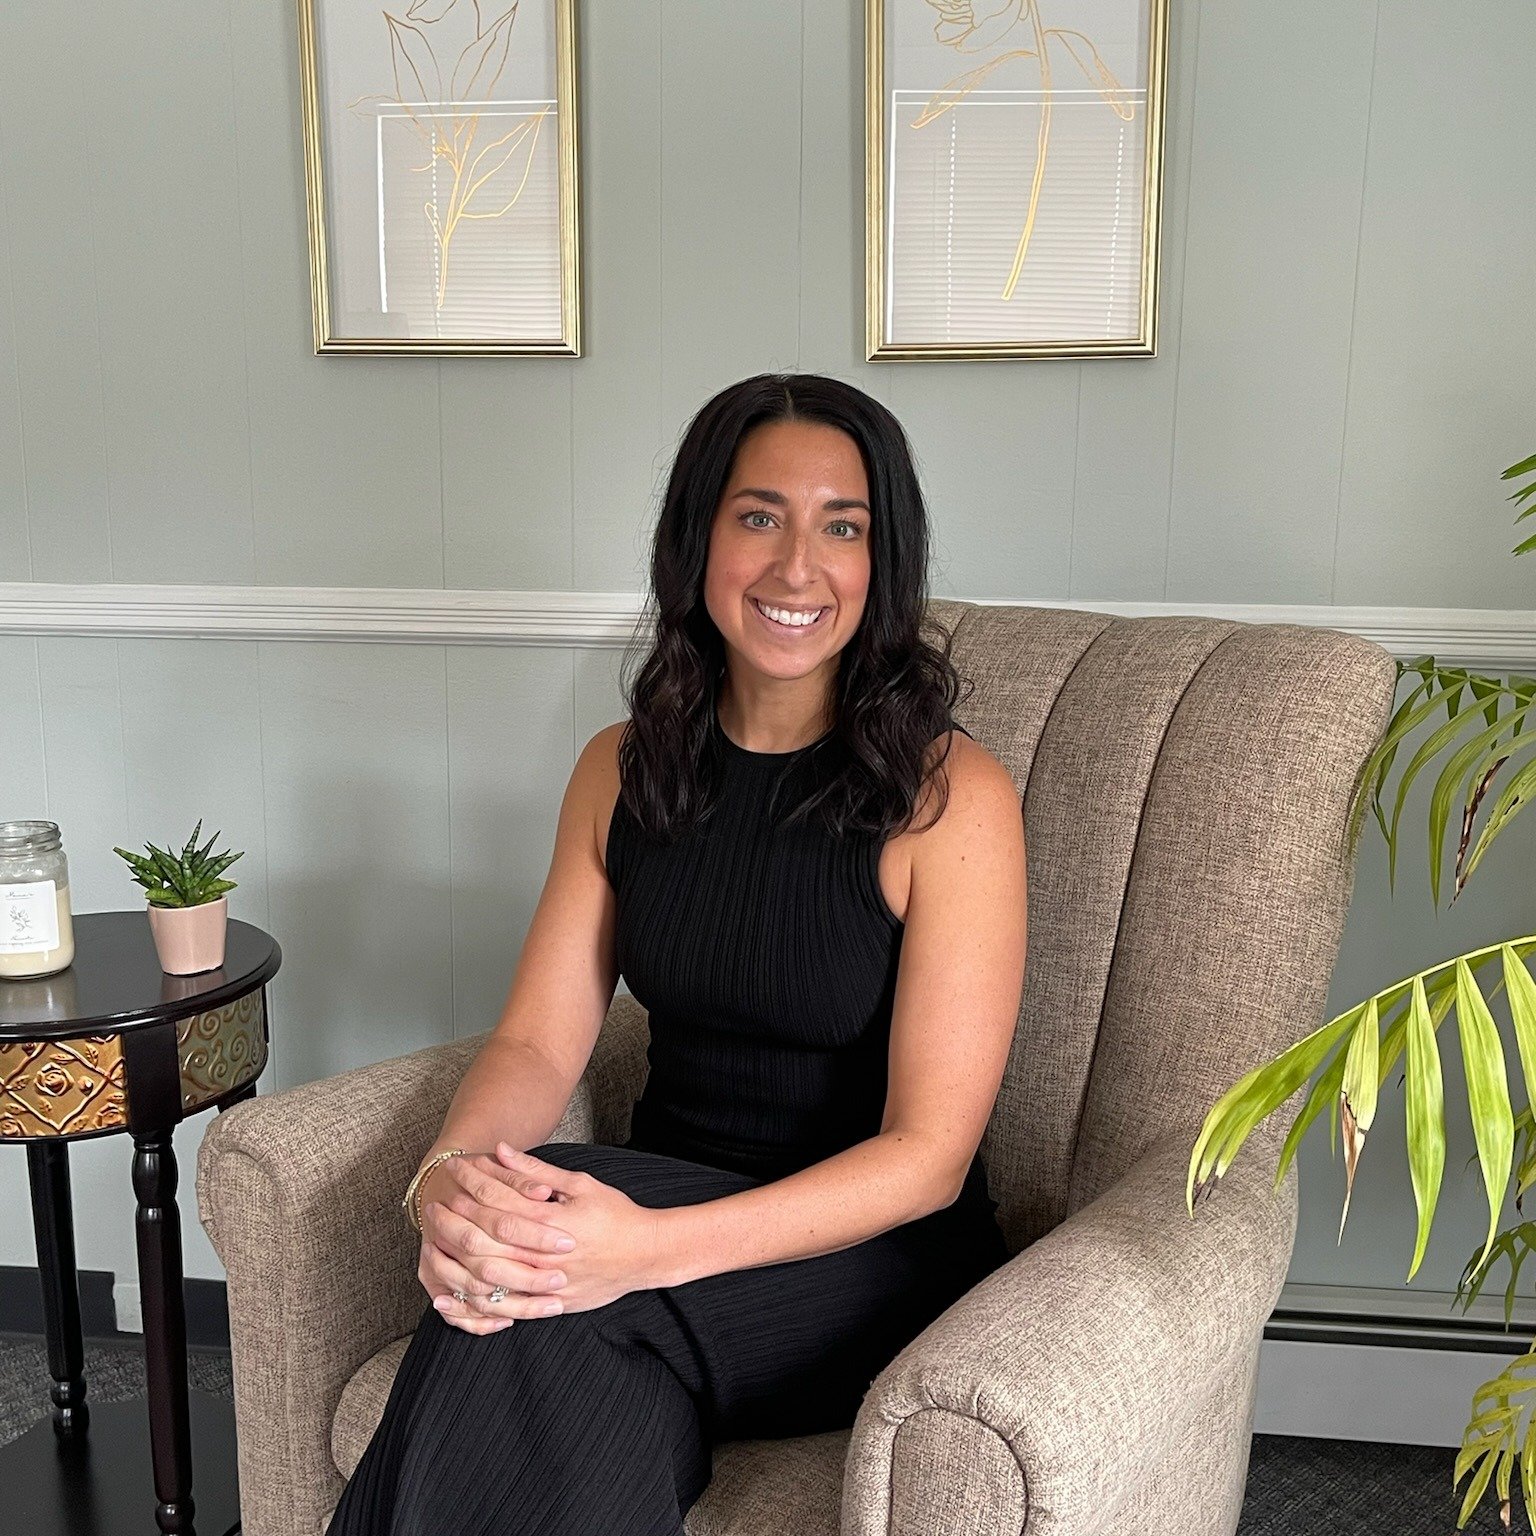 Therapist Feature:  Christine Vazzano LPC

Christine works with individuals 18+ and currently has limited availability!

Christine Vazzano earned a MS in Mental Health Counseling from MonmouthUniversity in West Long Branch, New Jersey. She is a DBT i